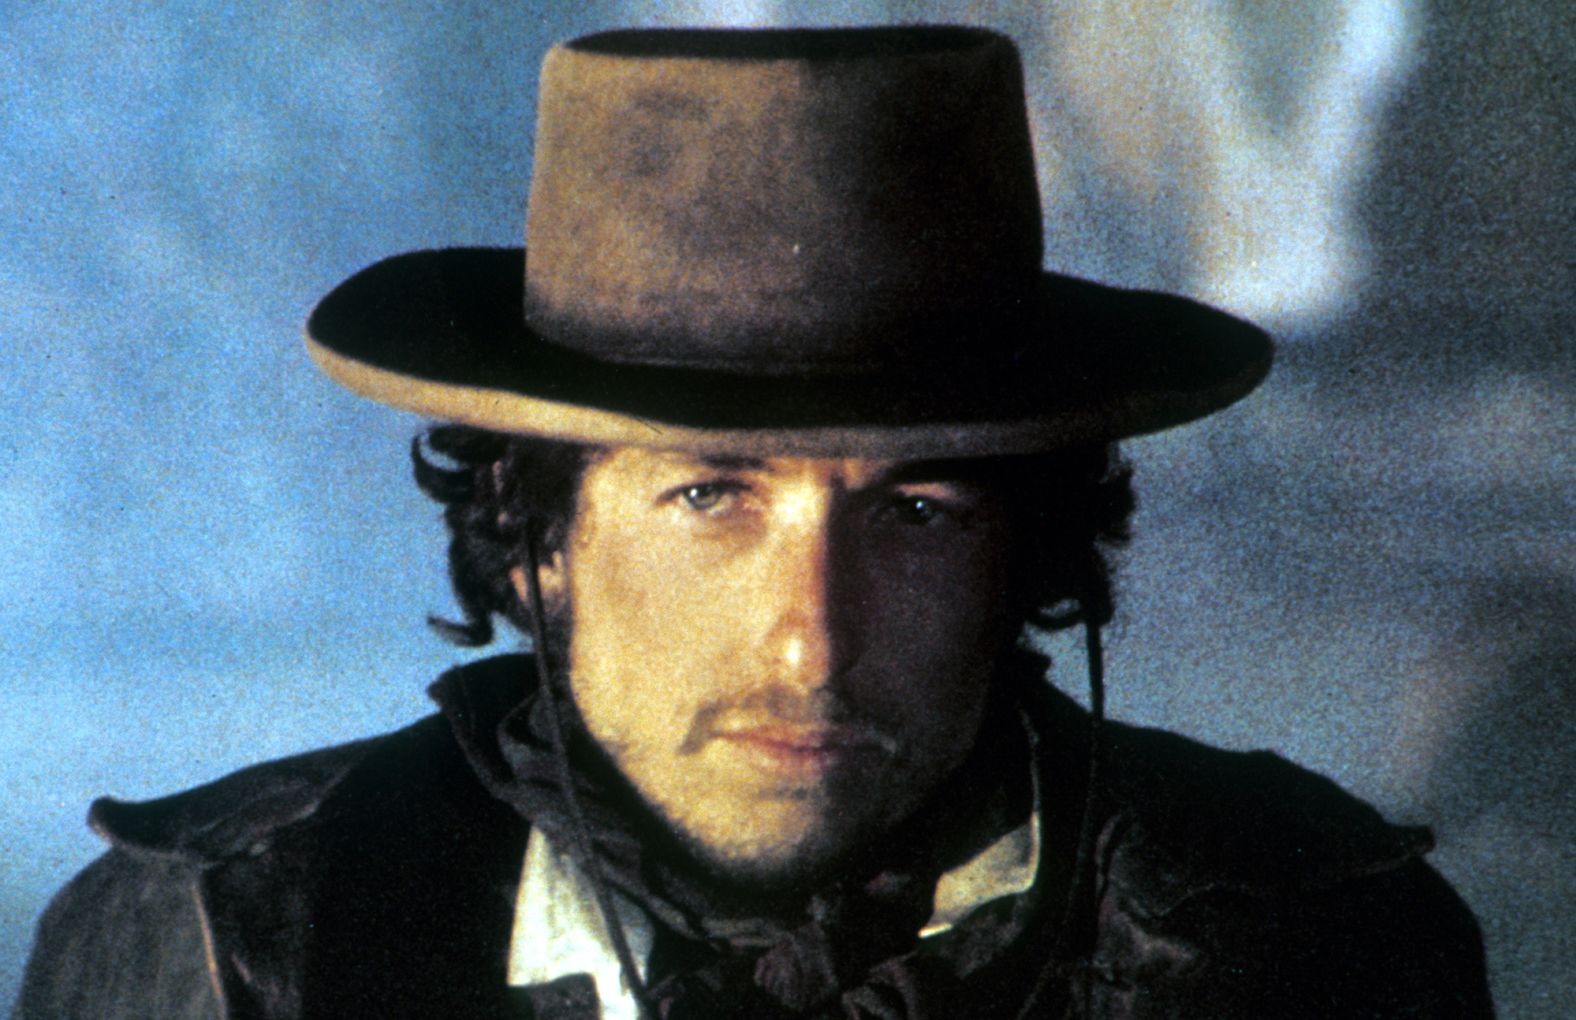 Dylan appears in a scene from the 1973 film "Pat Garrett and Billy the Kid." Dylan also recorded the soundtrack for the film.